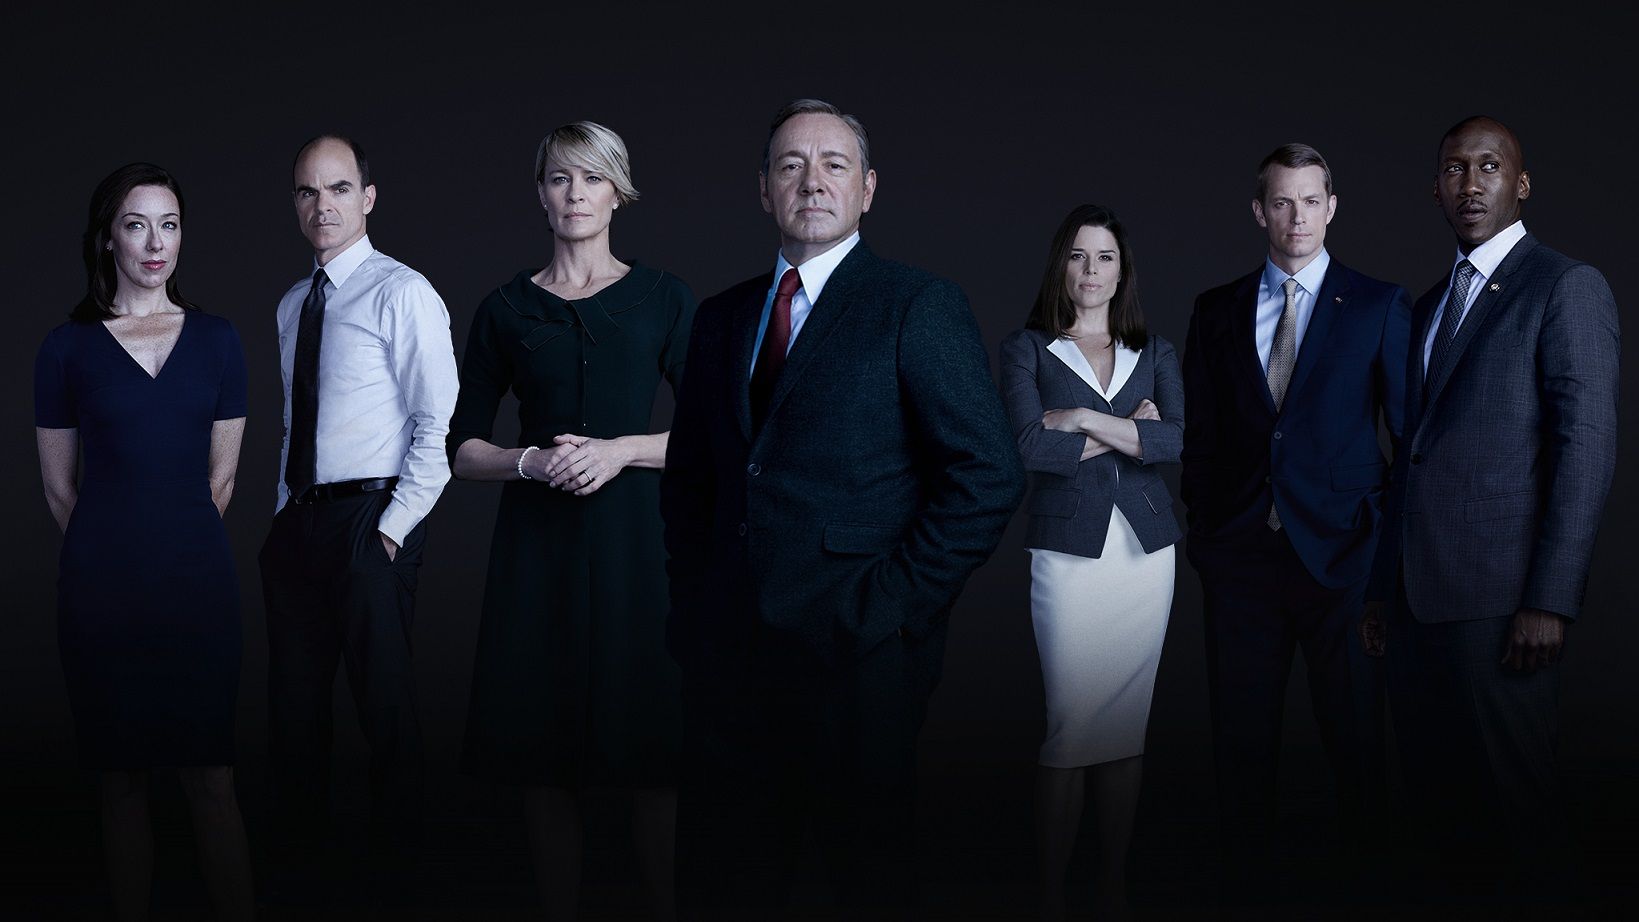 The latest “House of Cards” features, from left, Molly Parker, Michael Kelly, Robin Wright, Kevin Spacey, Neve Campbell, Derek Cecil, Mahershala Ali, and many more.